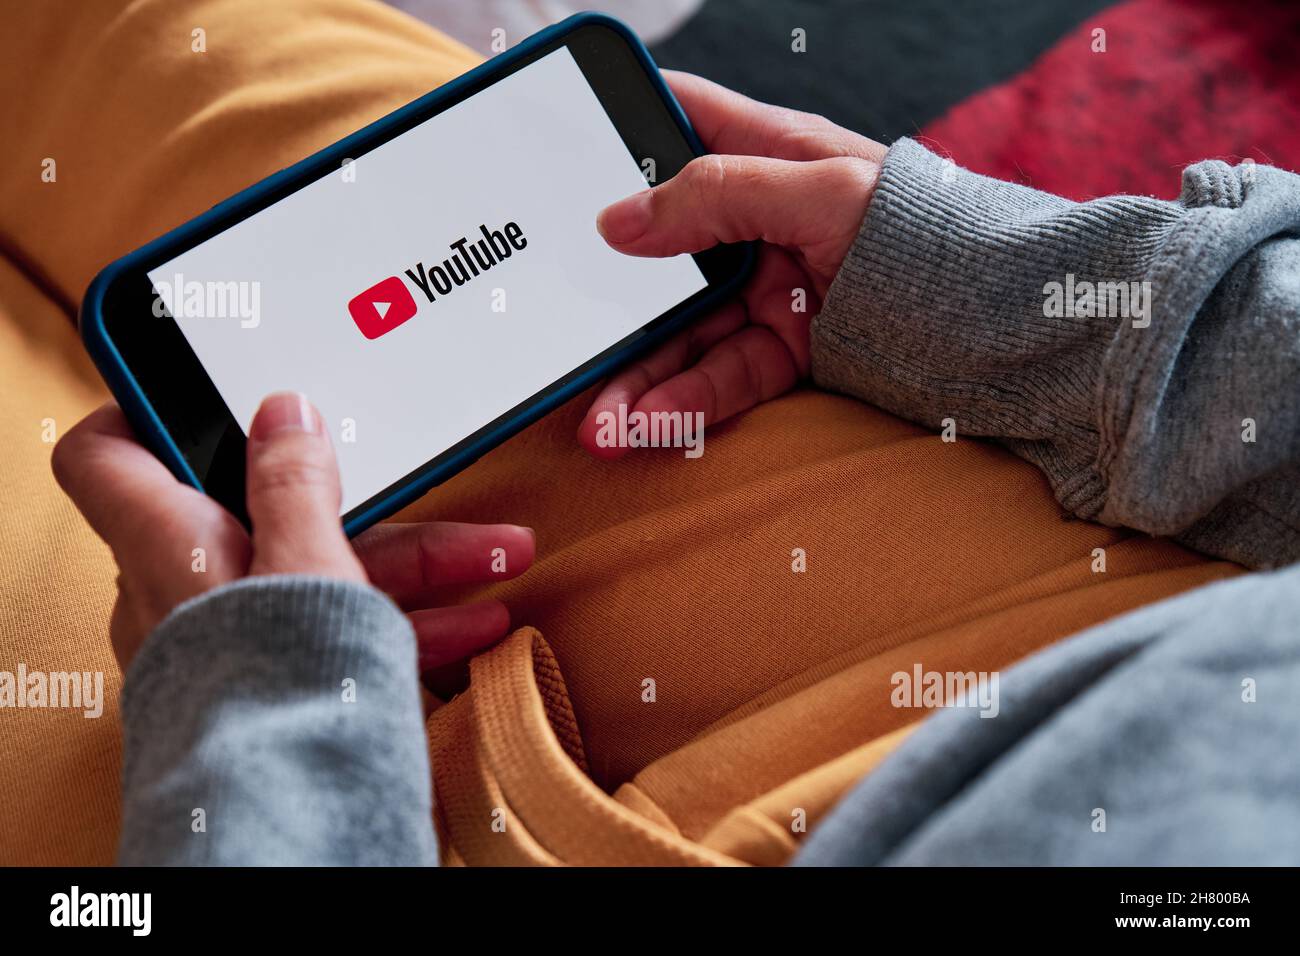 Barcelona, Spain - March 22 2021 : a woman holding an iPhone 12 pro opens youtube app Stock Photo